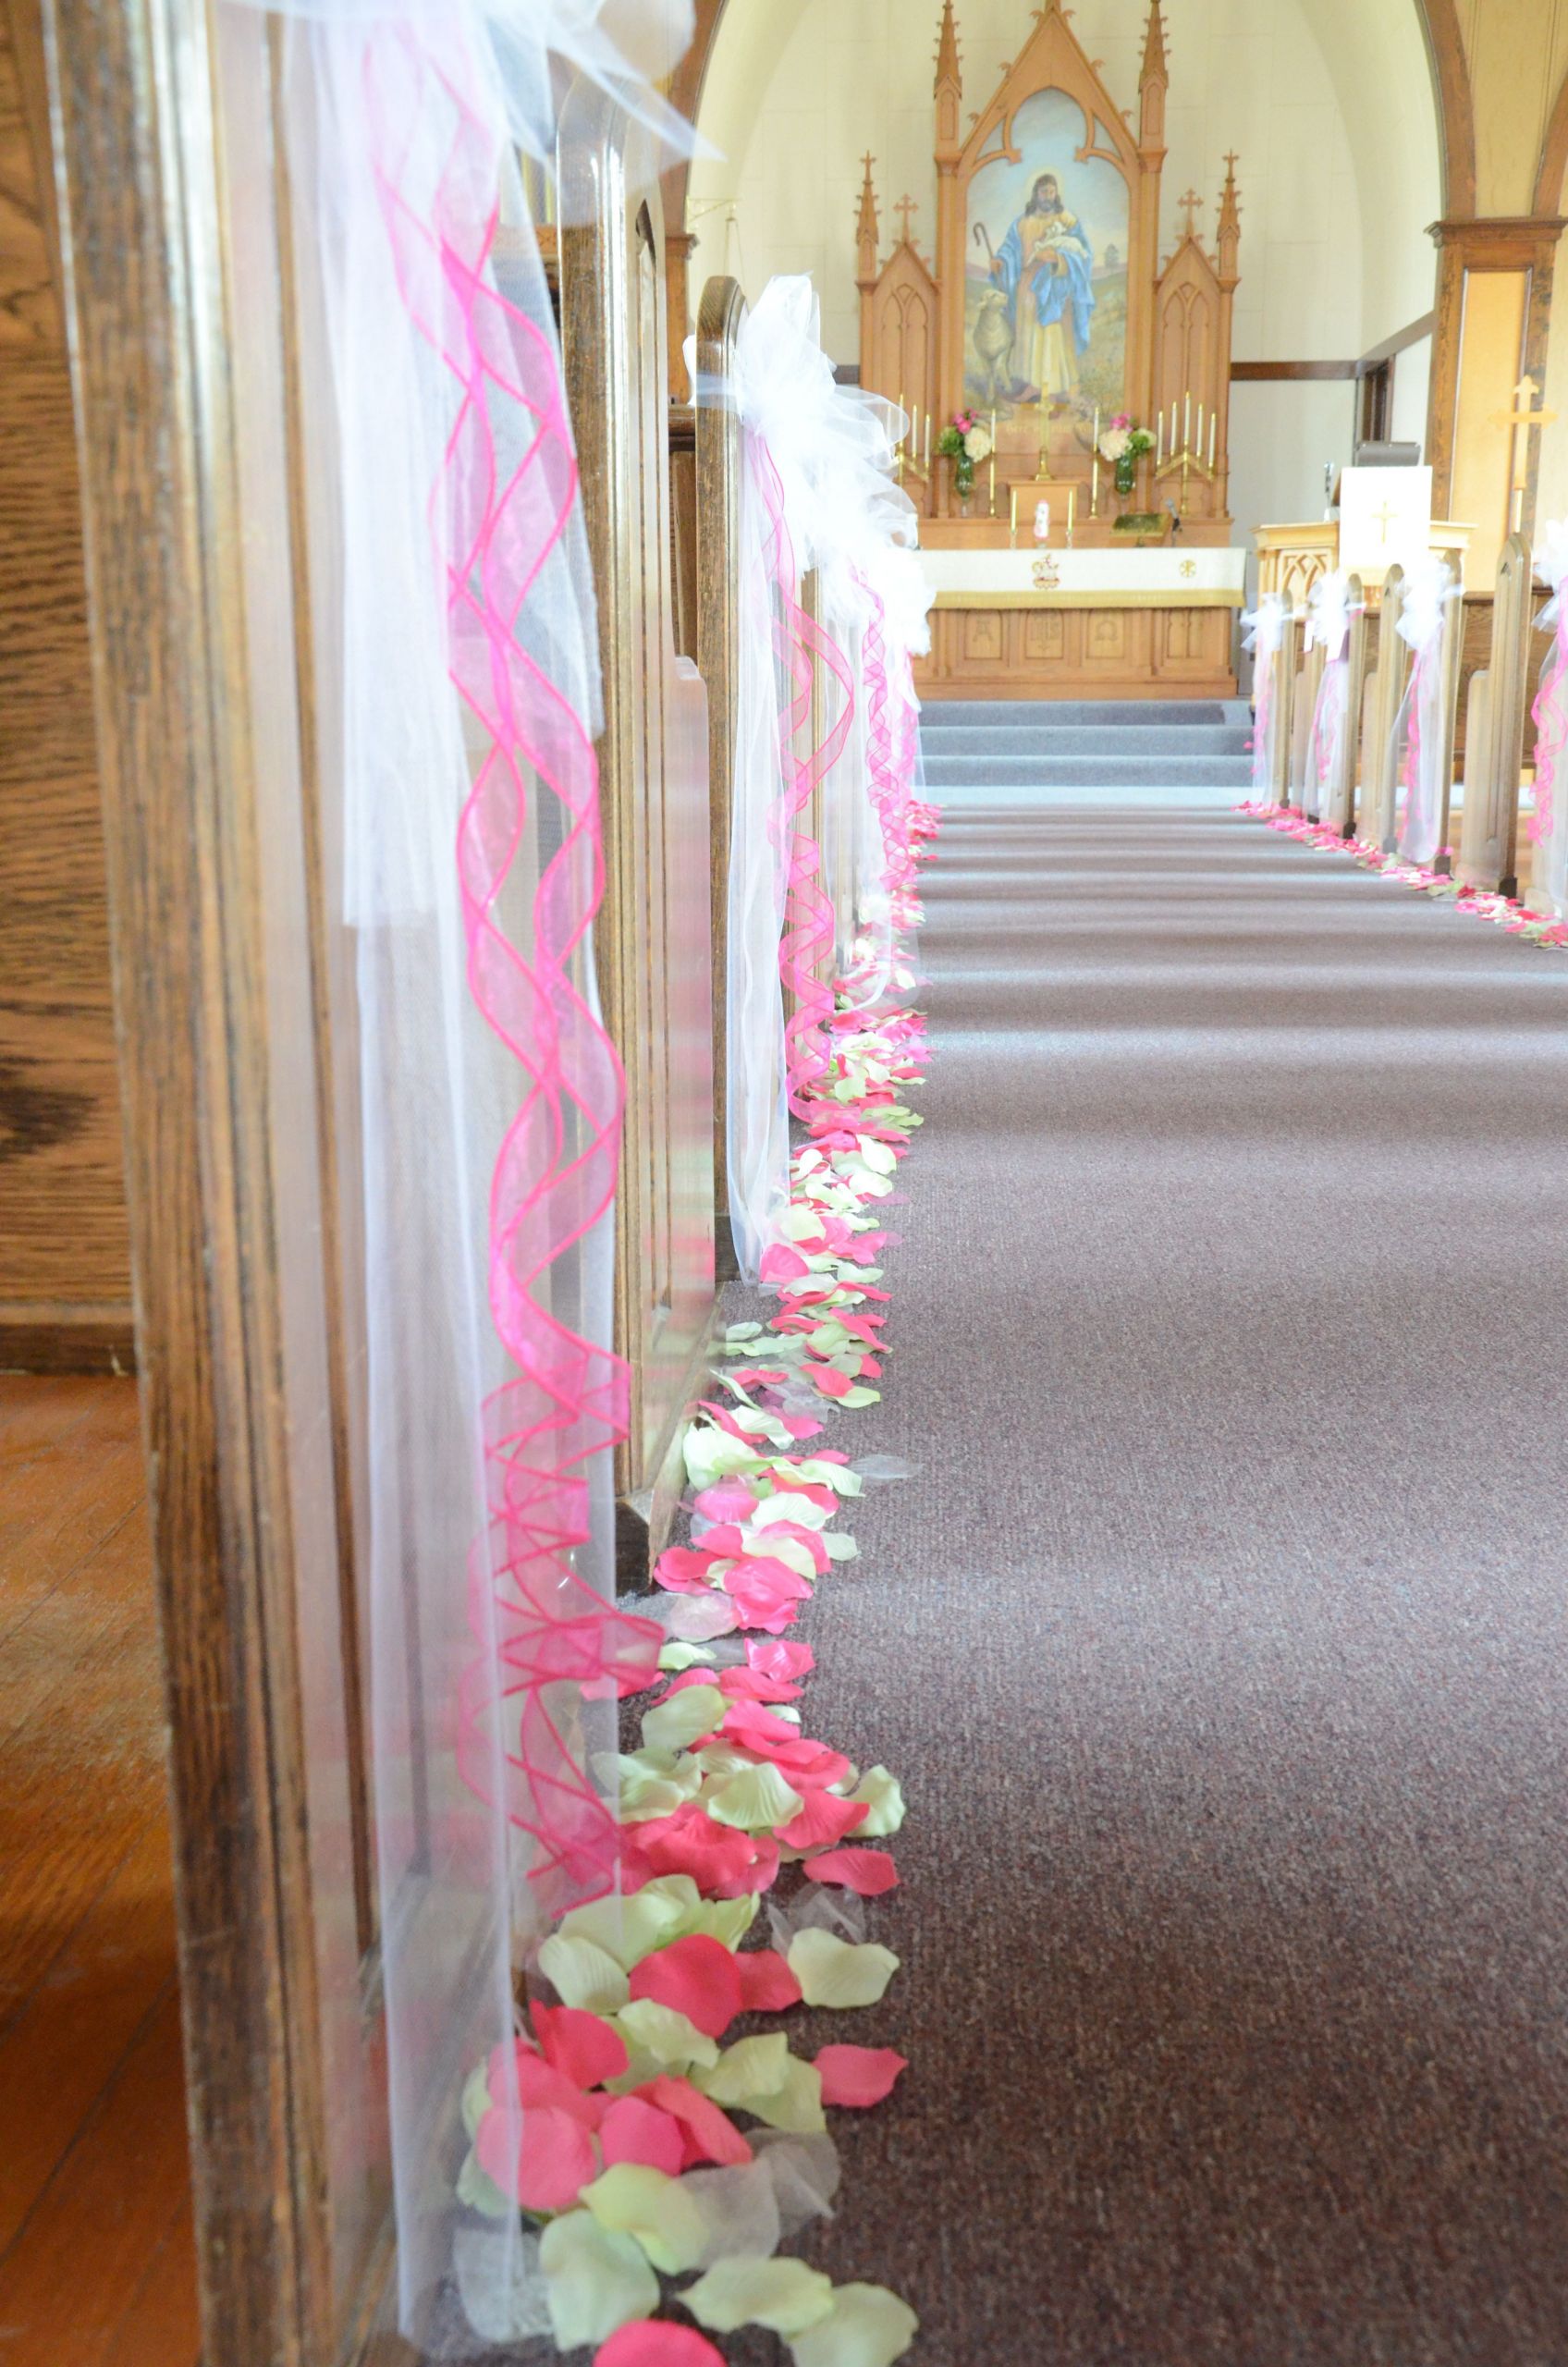 DIY Pew Decorations
 pew bows and petals along the aisle